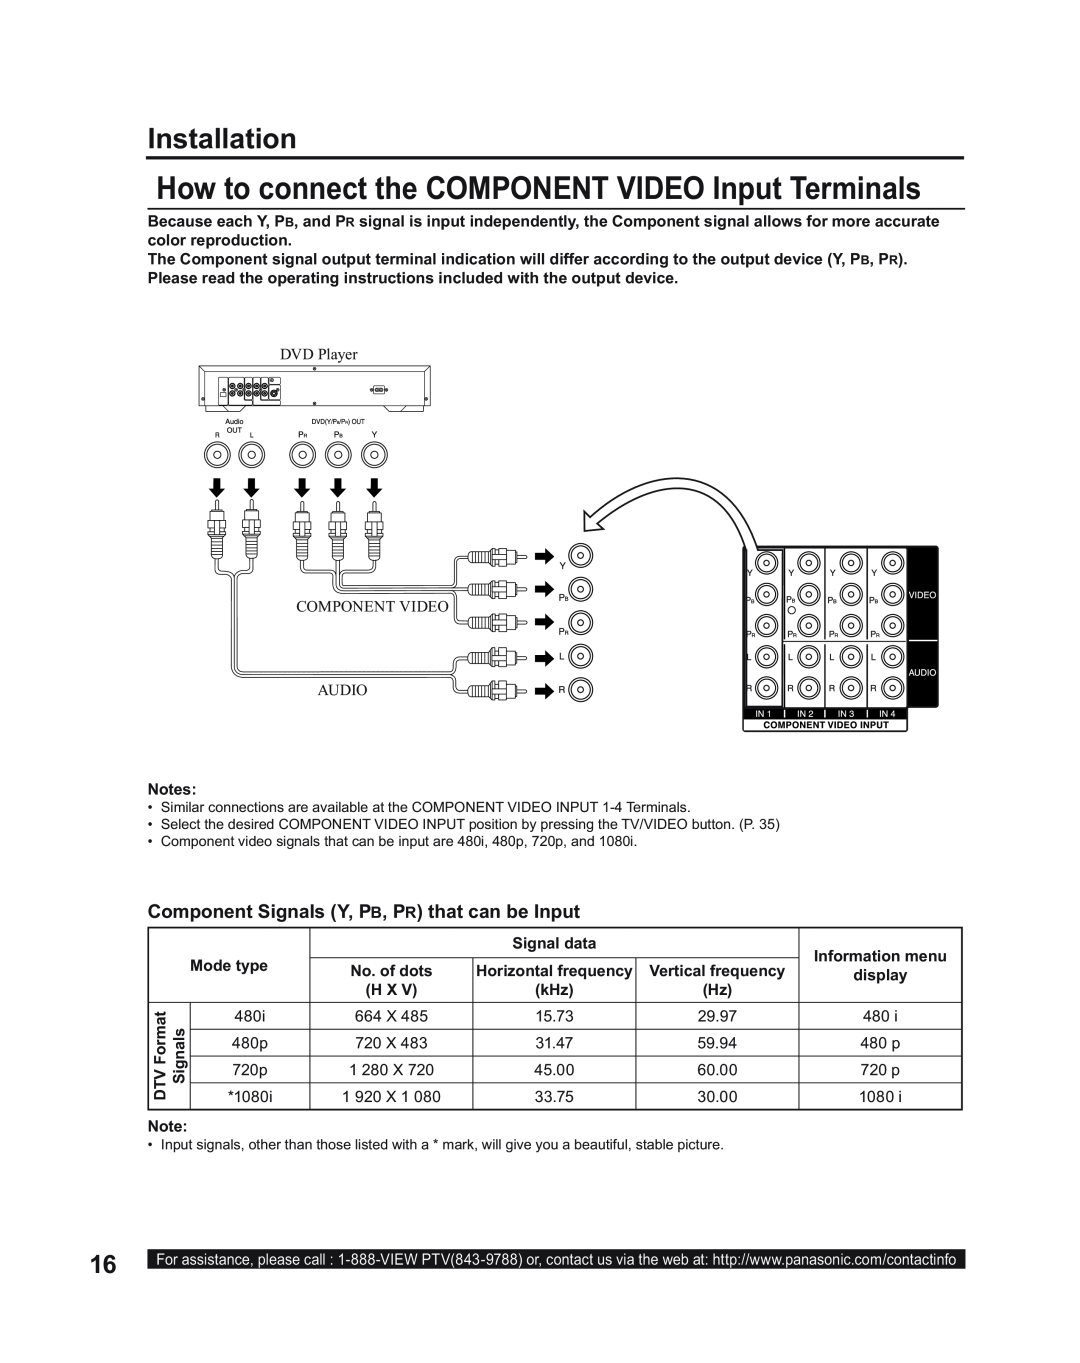 Panasonic PT-50LC14 Component Signals Y, PB, PR that can be Input, How to connect the COMPONENT VIDEO Input Terminals 